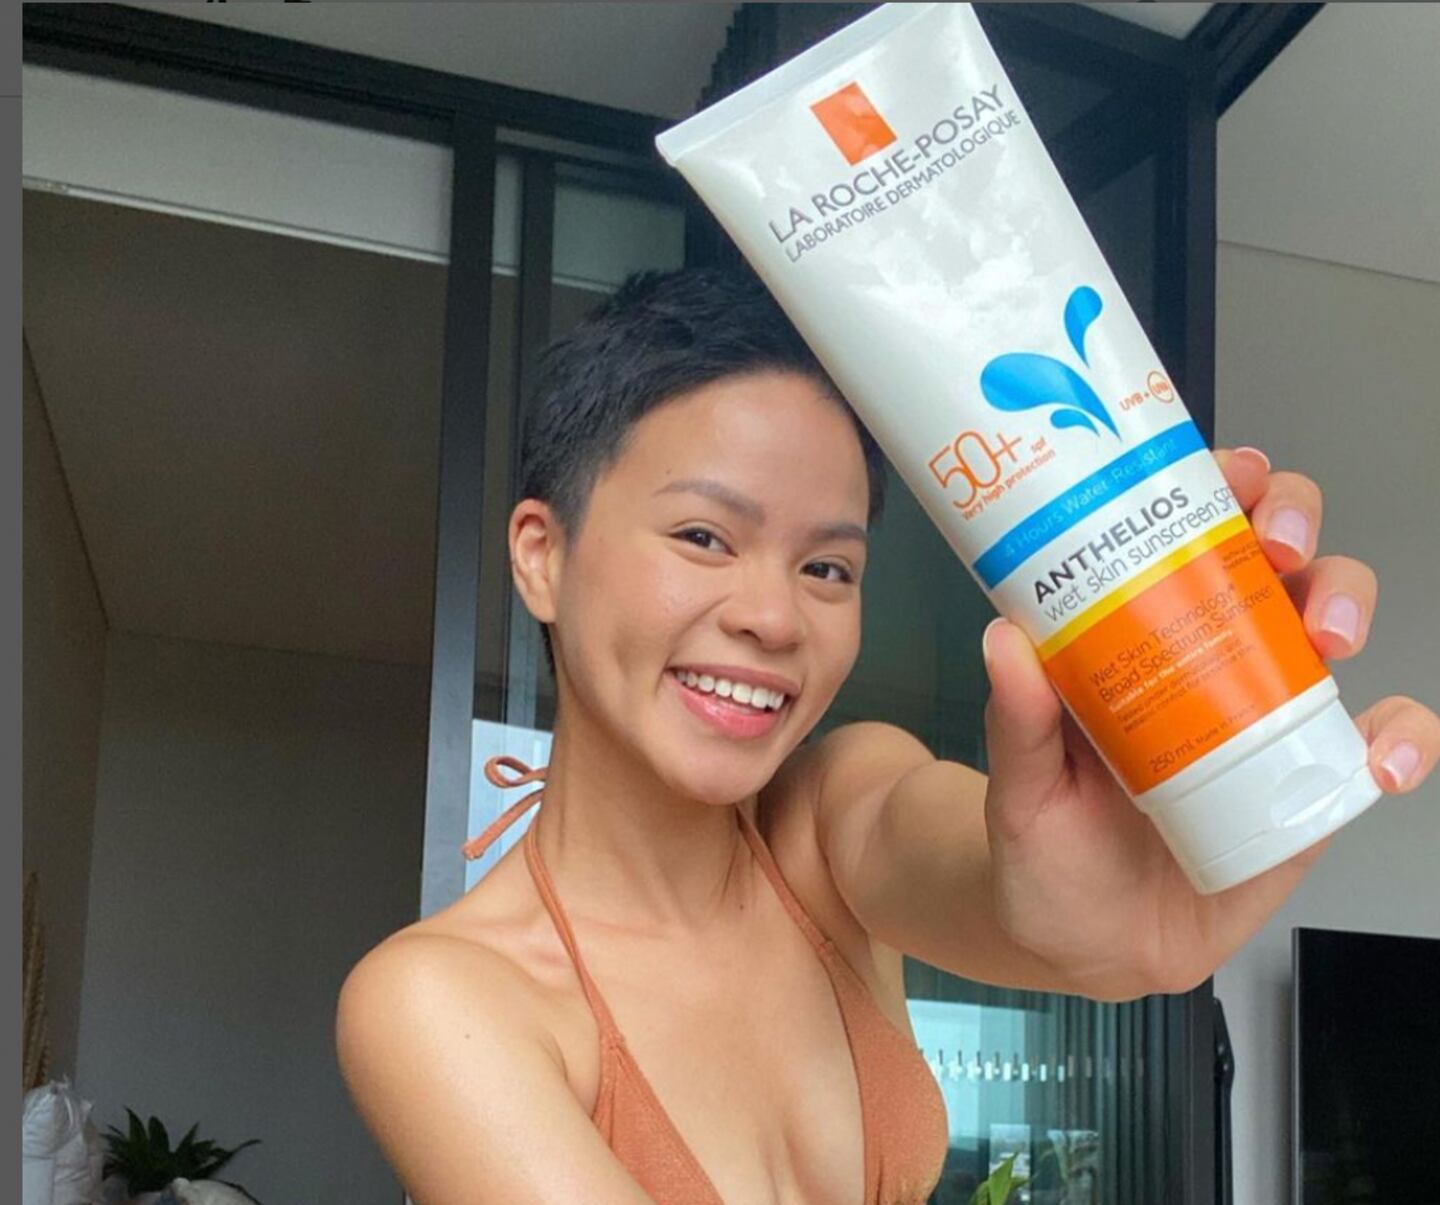 Reviews and testimonials about sunscreens and skincare that makes claims about health or therapeutical benefits are subject to new rules in Australia.